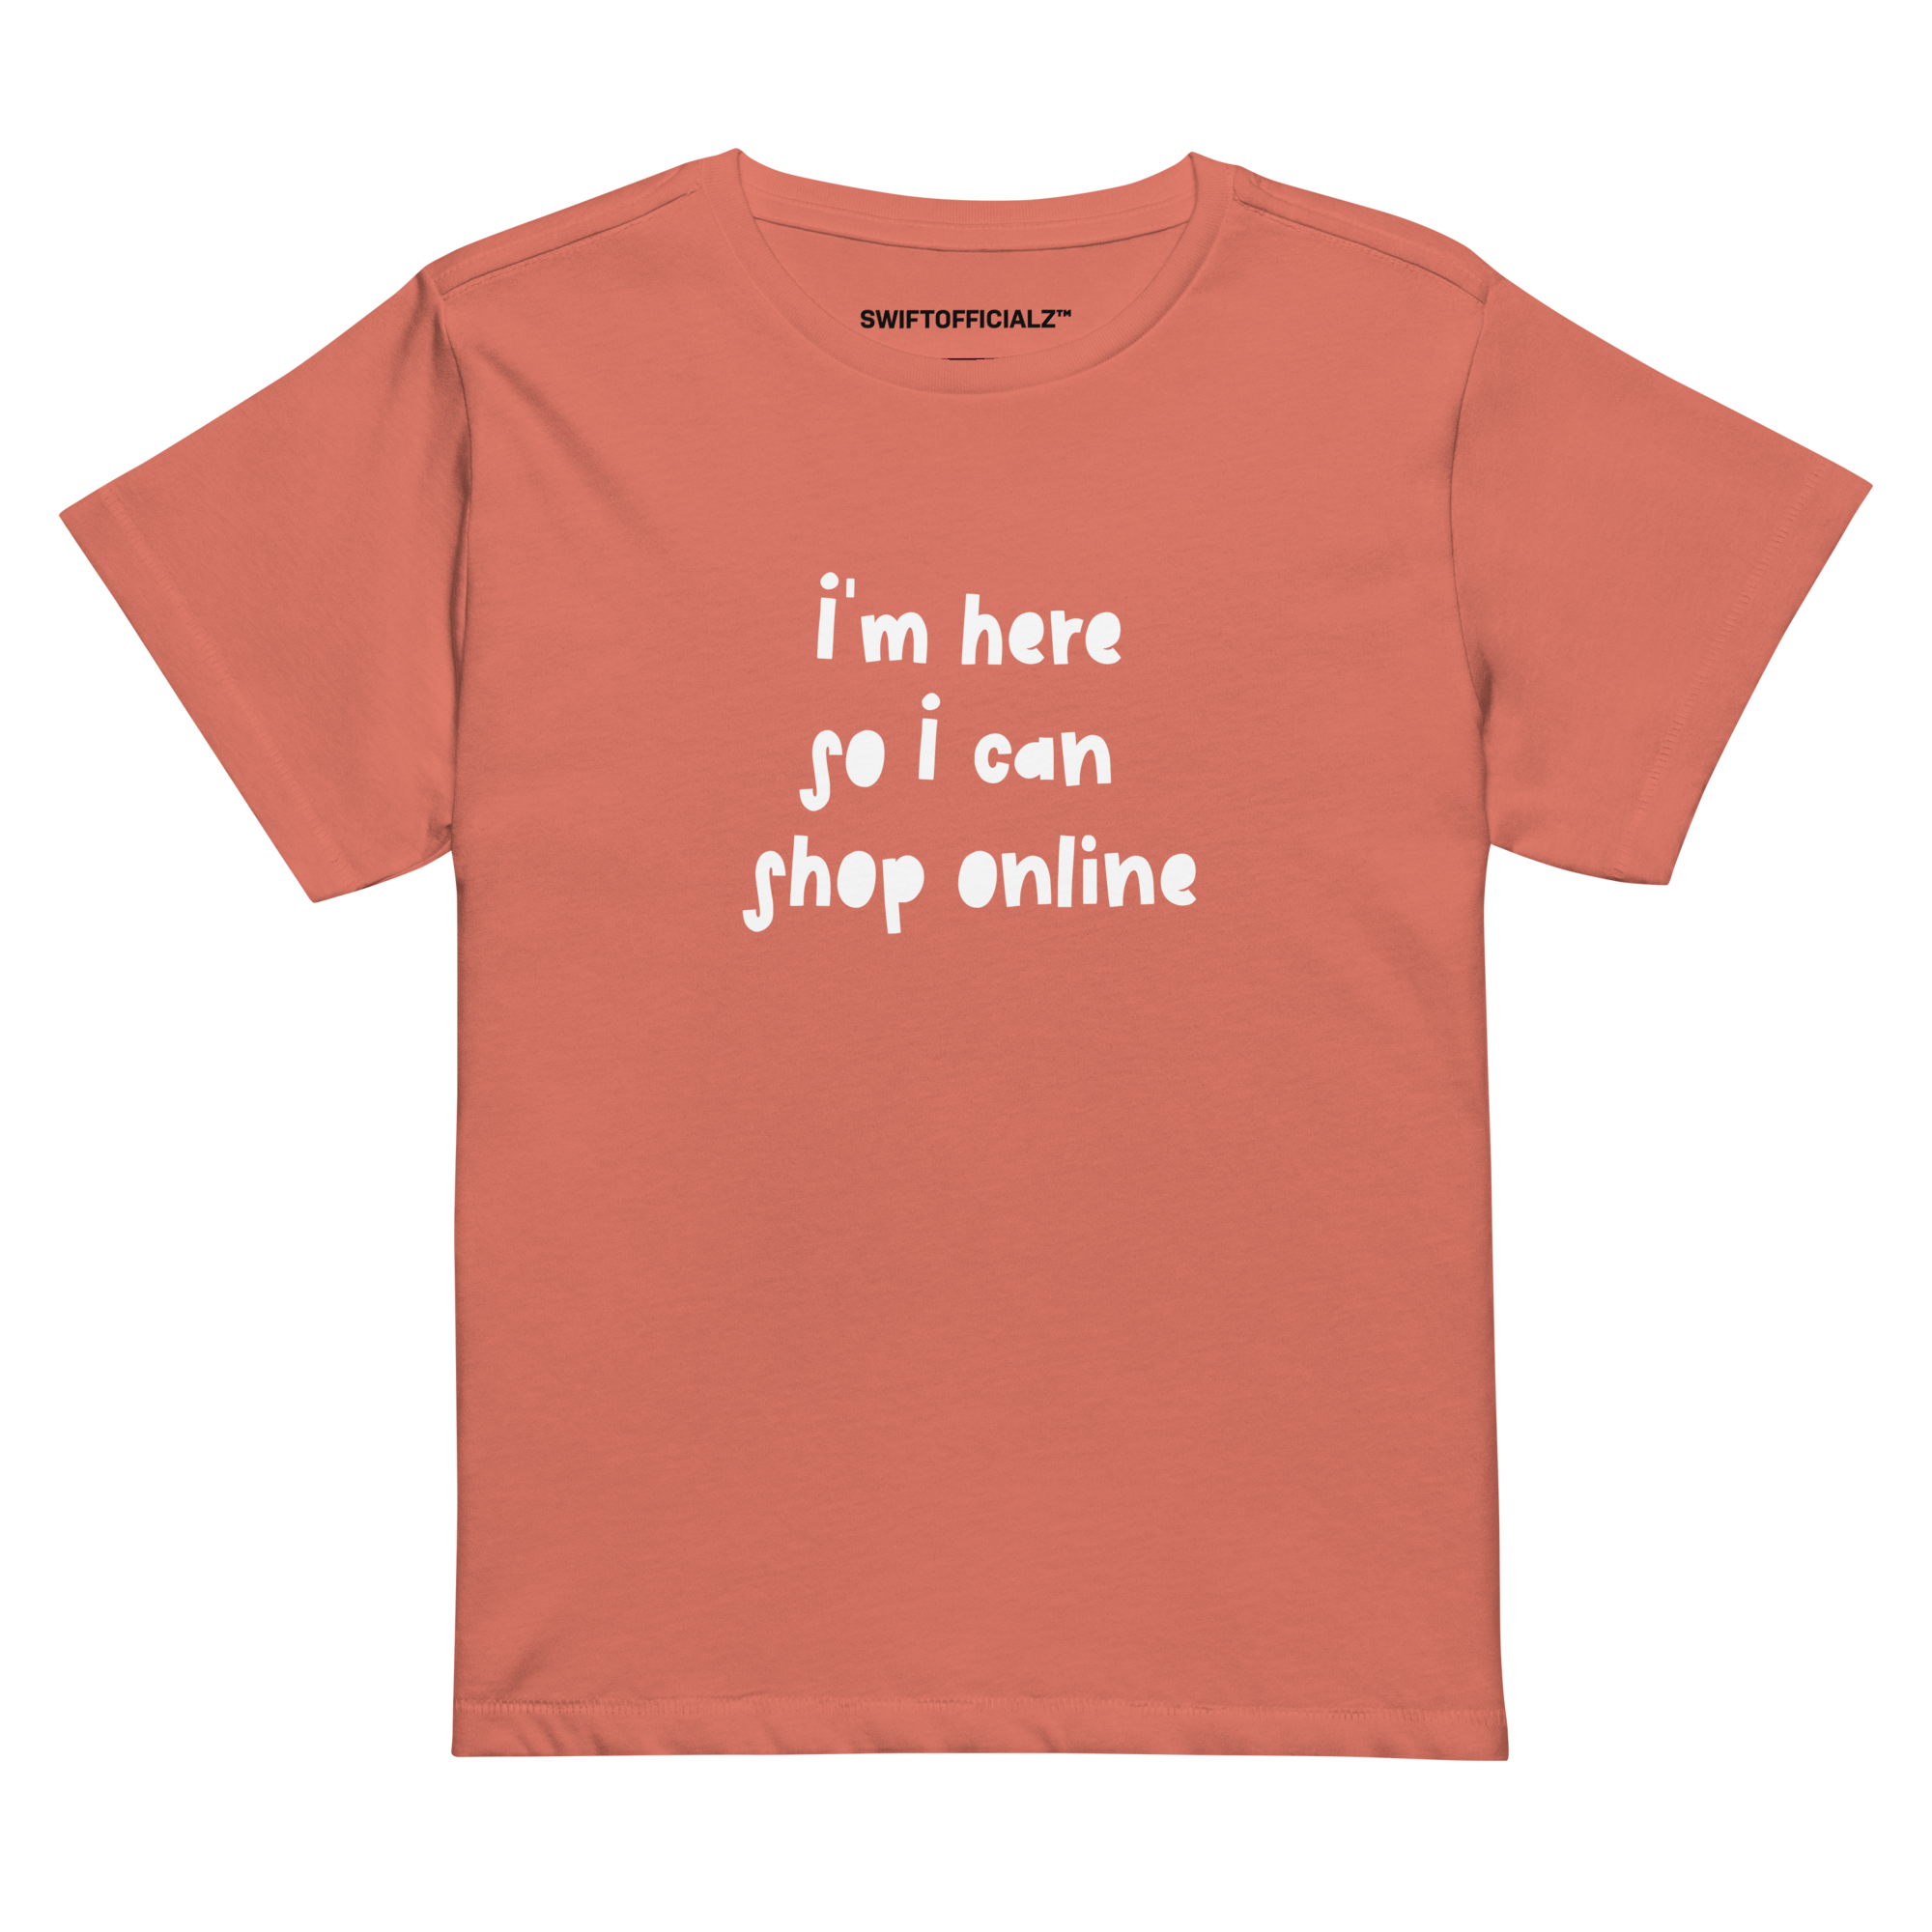 "I'm here so I can shop online" Women’s High-Waisted T-Shirt